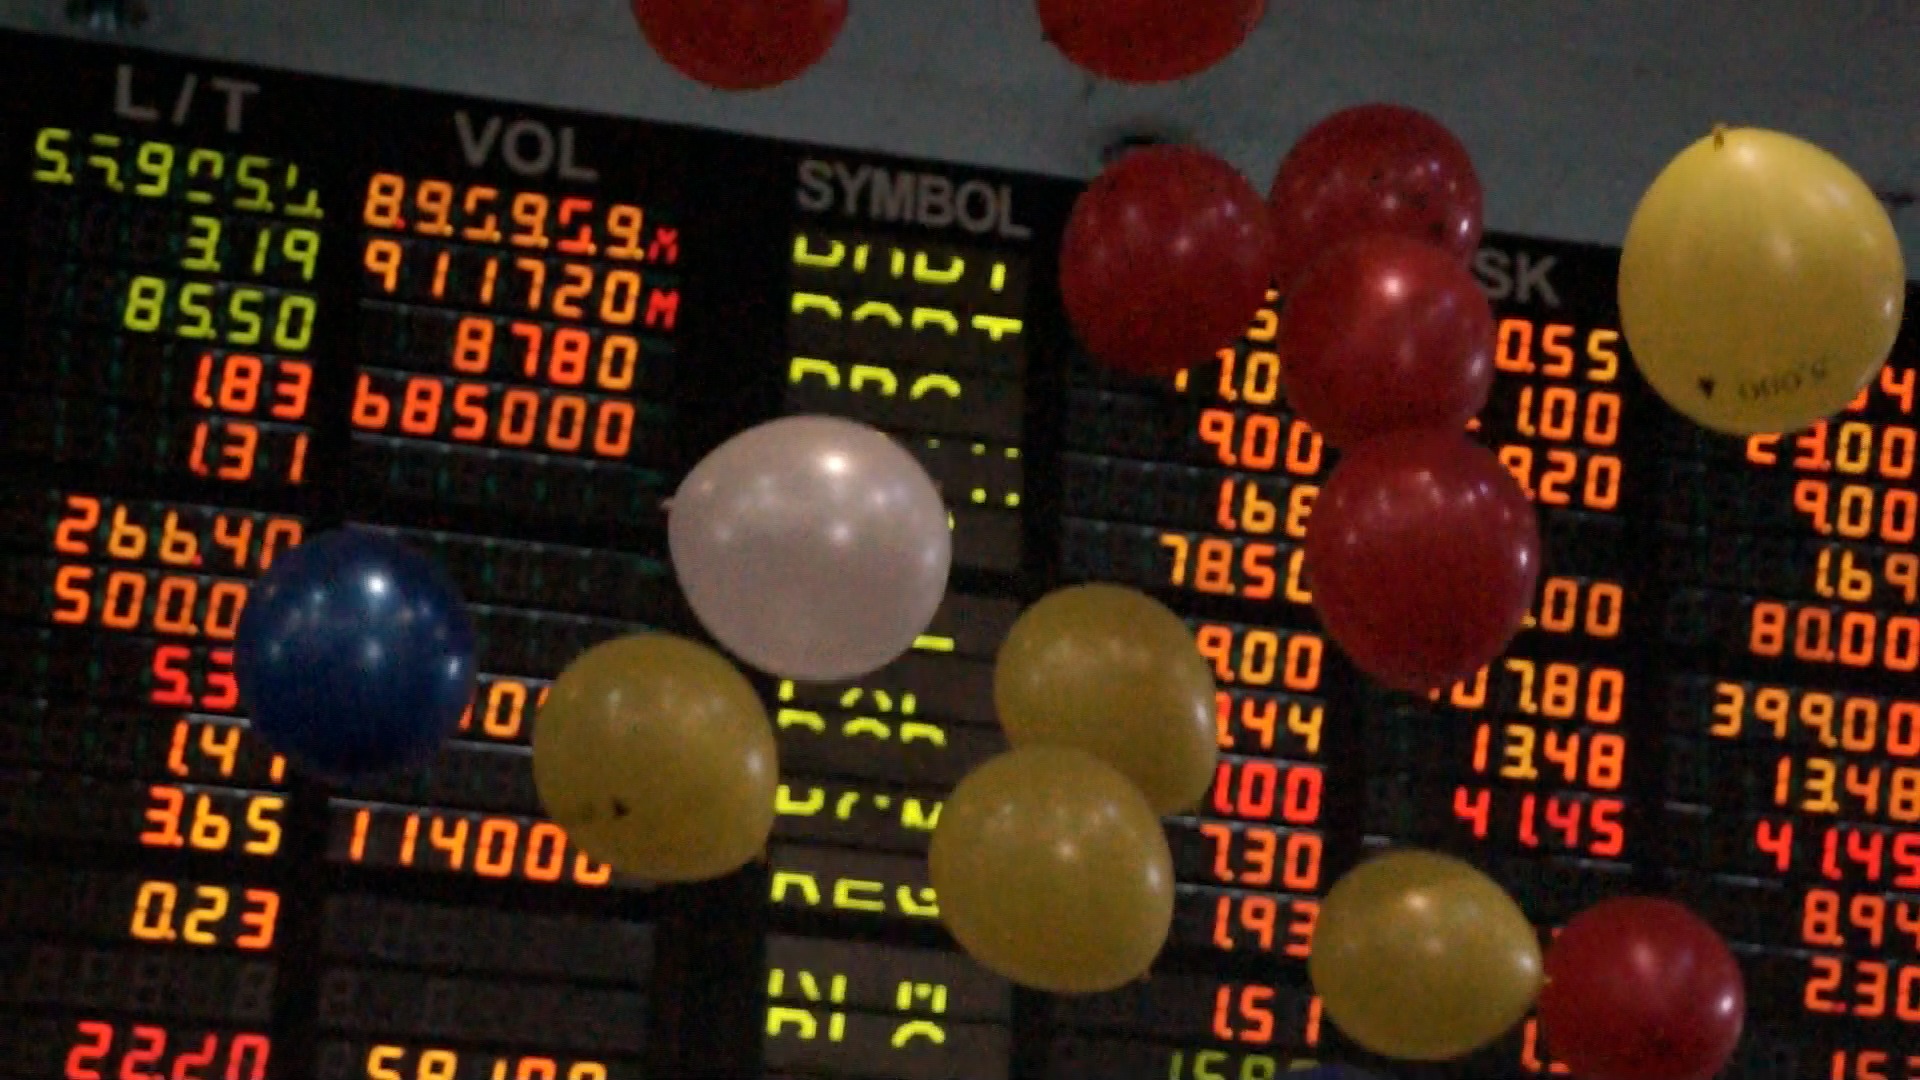 CELEBRATING AQUINOMICS. Balloons are released after President Aquino opens trading on March 6, 2012.